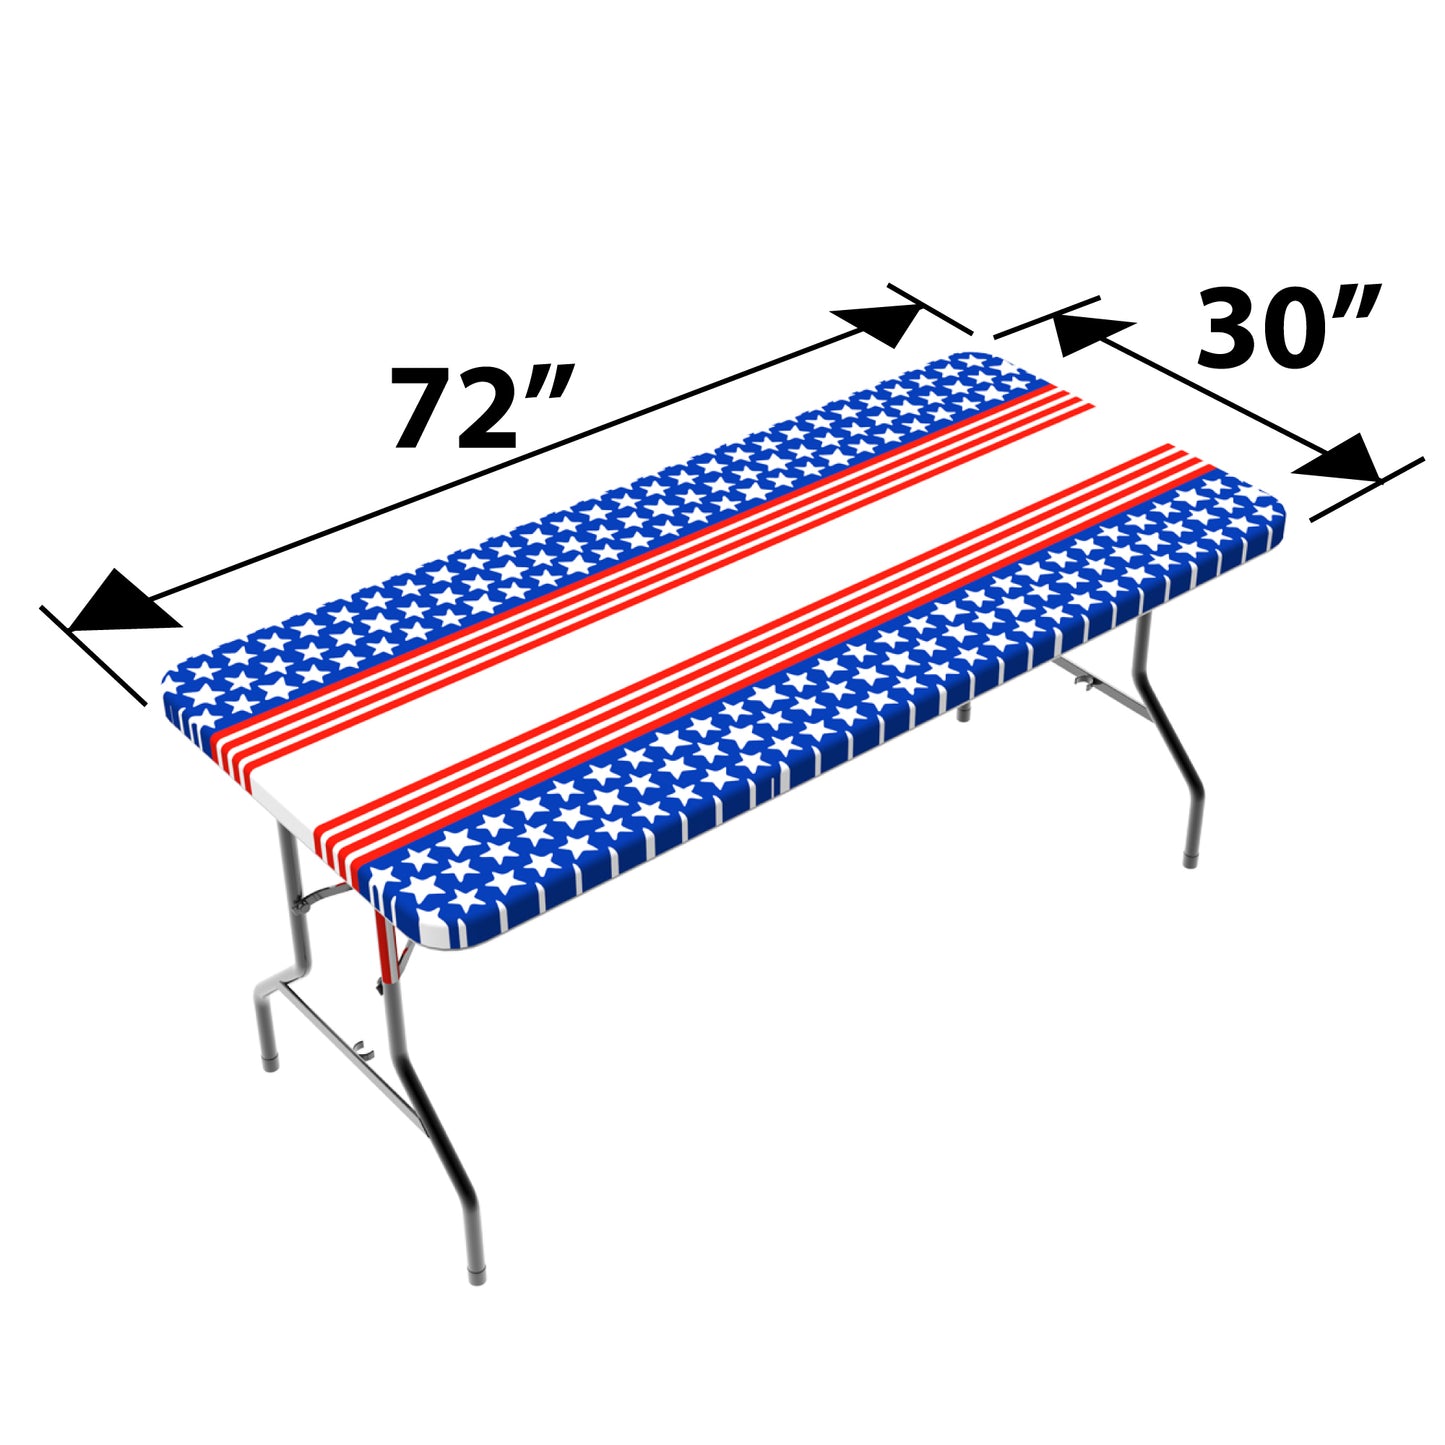 TableCloth PLUS 72" Stars & Stripes Fitted Polyester Tablecloth for 6' Folding Tables dimensions